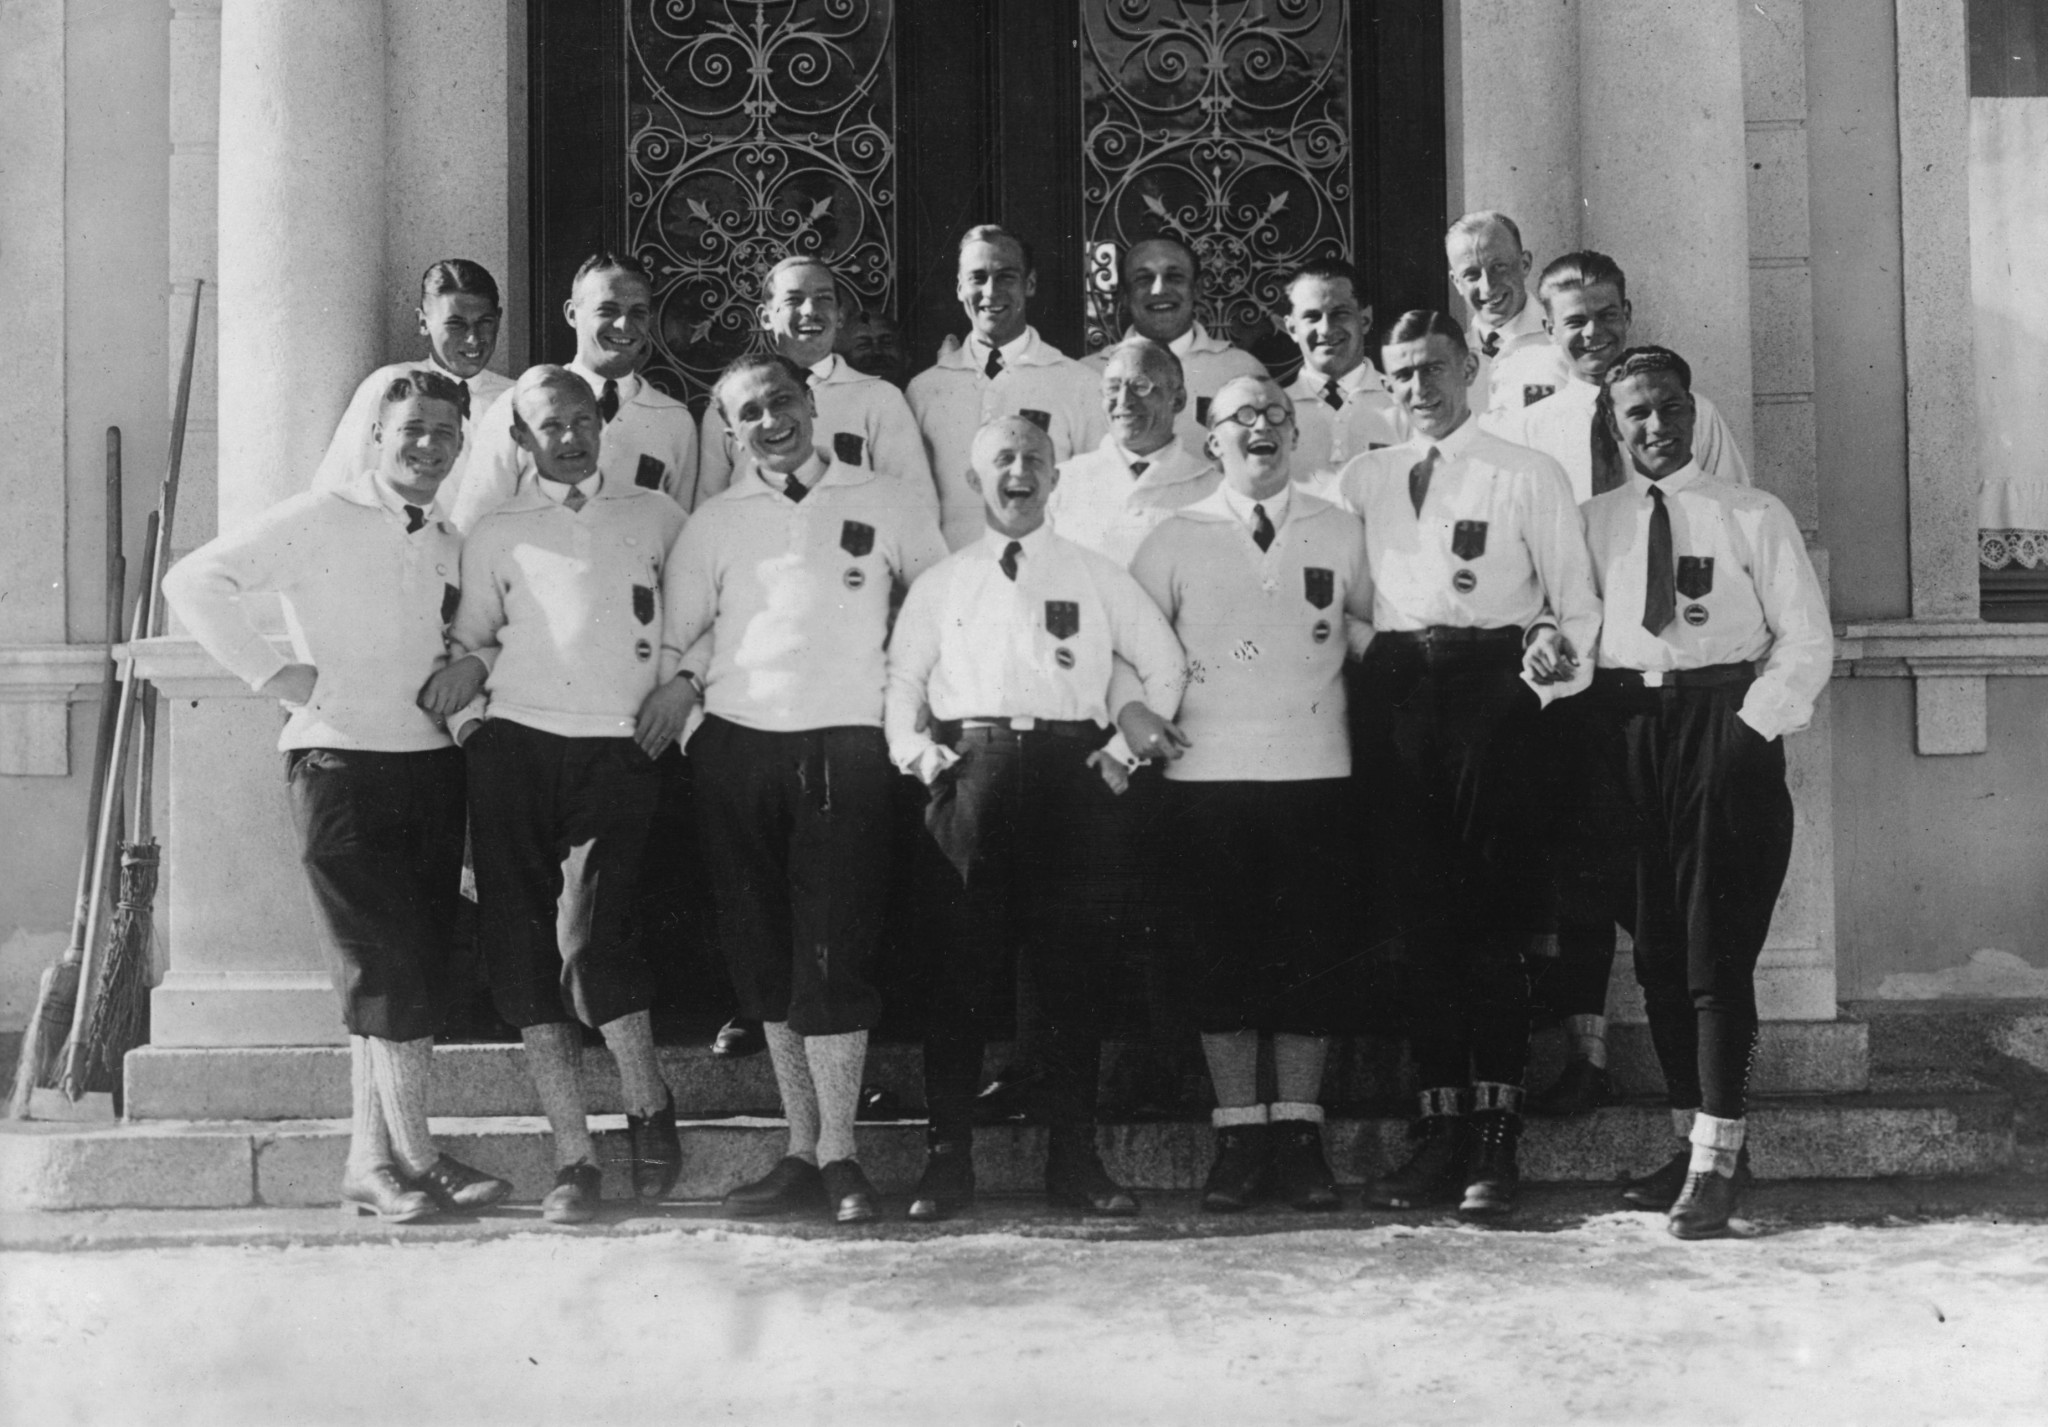 The happy German bobsleigh team which won bronze at the 1928 Winter Olympics in St Moritz ©Getty Images